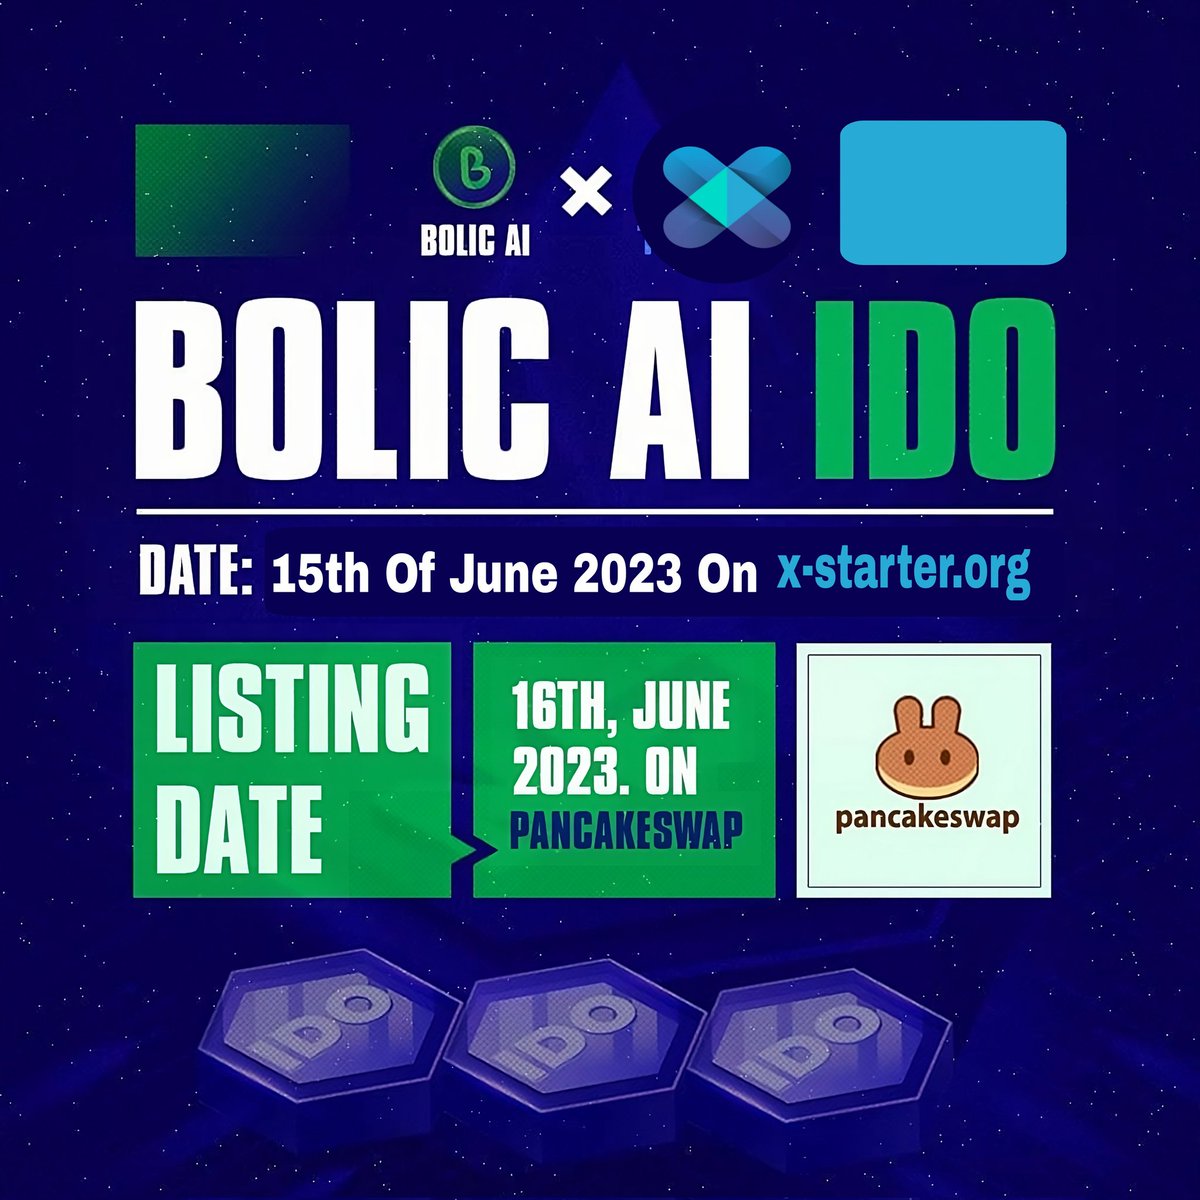 We're thrilled to share the news of our upcoming second IDO on the renowned @XLaunch_CM. Mark your calendars for June 15, 2023, as this will be the date of our exciting IDO event.
x-starter.org/pools/pools-li…
#CryptoNews #Messi𓃵 #IDO #Binance #Airdrops #BSC #BNB #BREAKING_NEWS #NFT